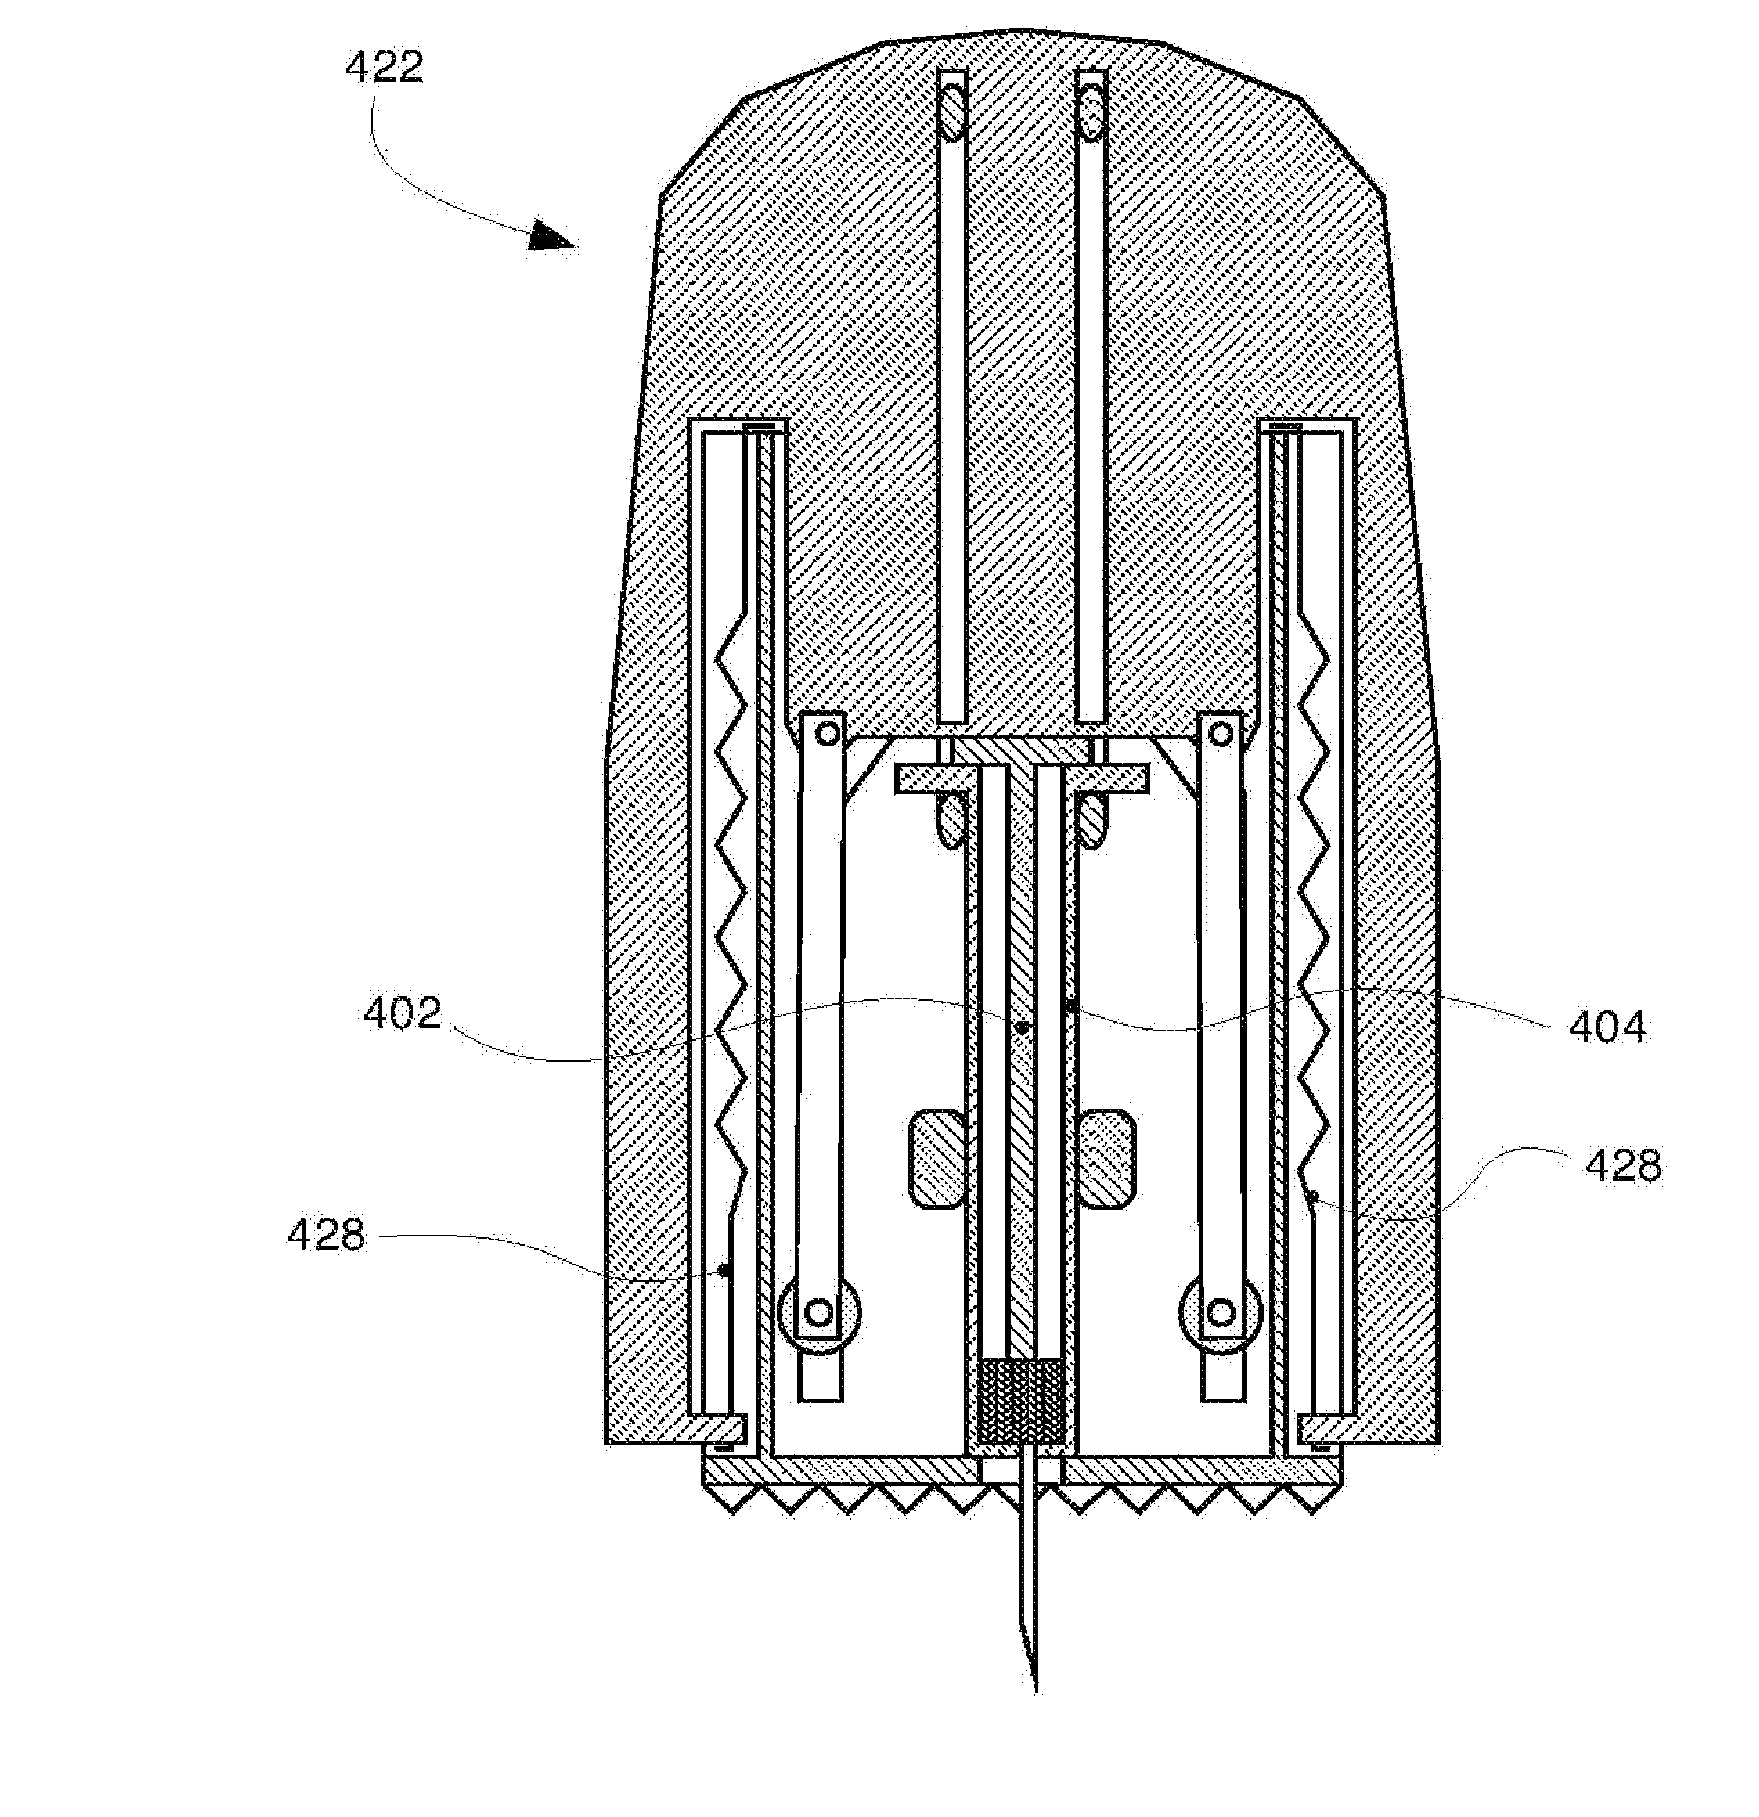 Palm-based injector actuation and safety surfaces